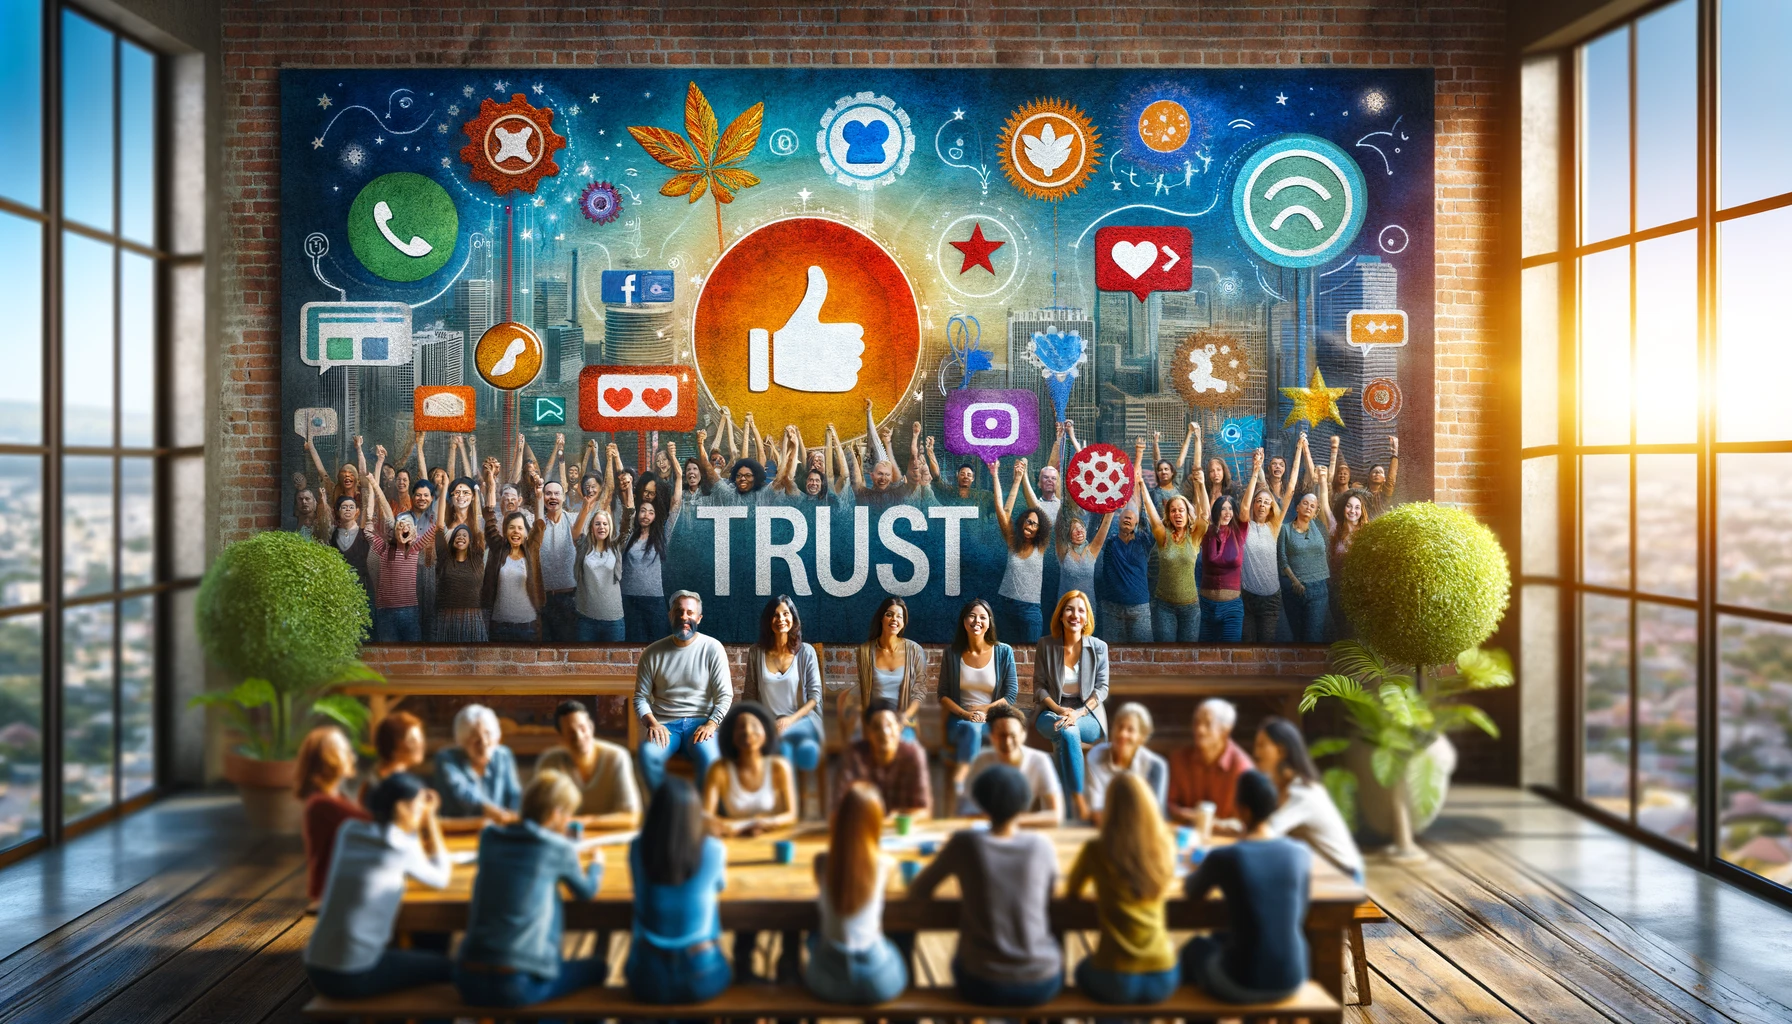 A vibrant and welcoming image depicting diverse customers sharing positive experiences with a brand through user-generated content, including social media posts, reviews, and photos, highlighting the impact of UGC on brand trust and authenticity in marketing.